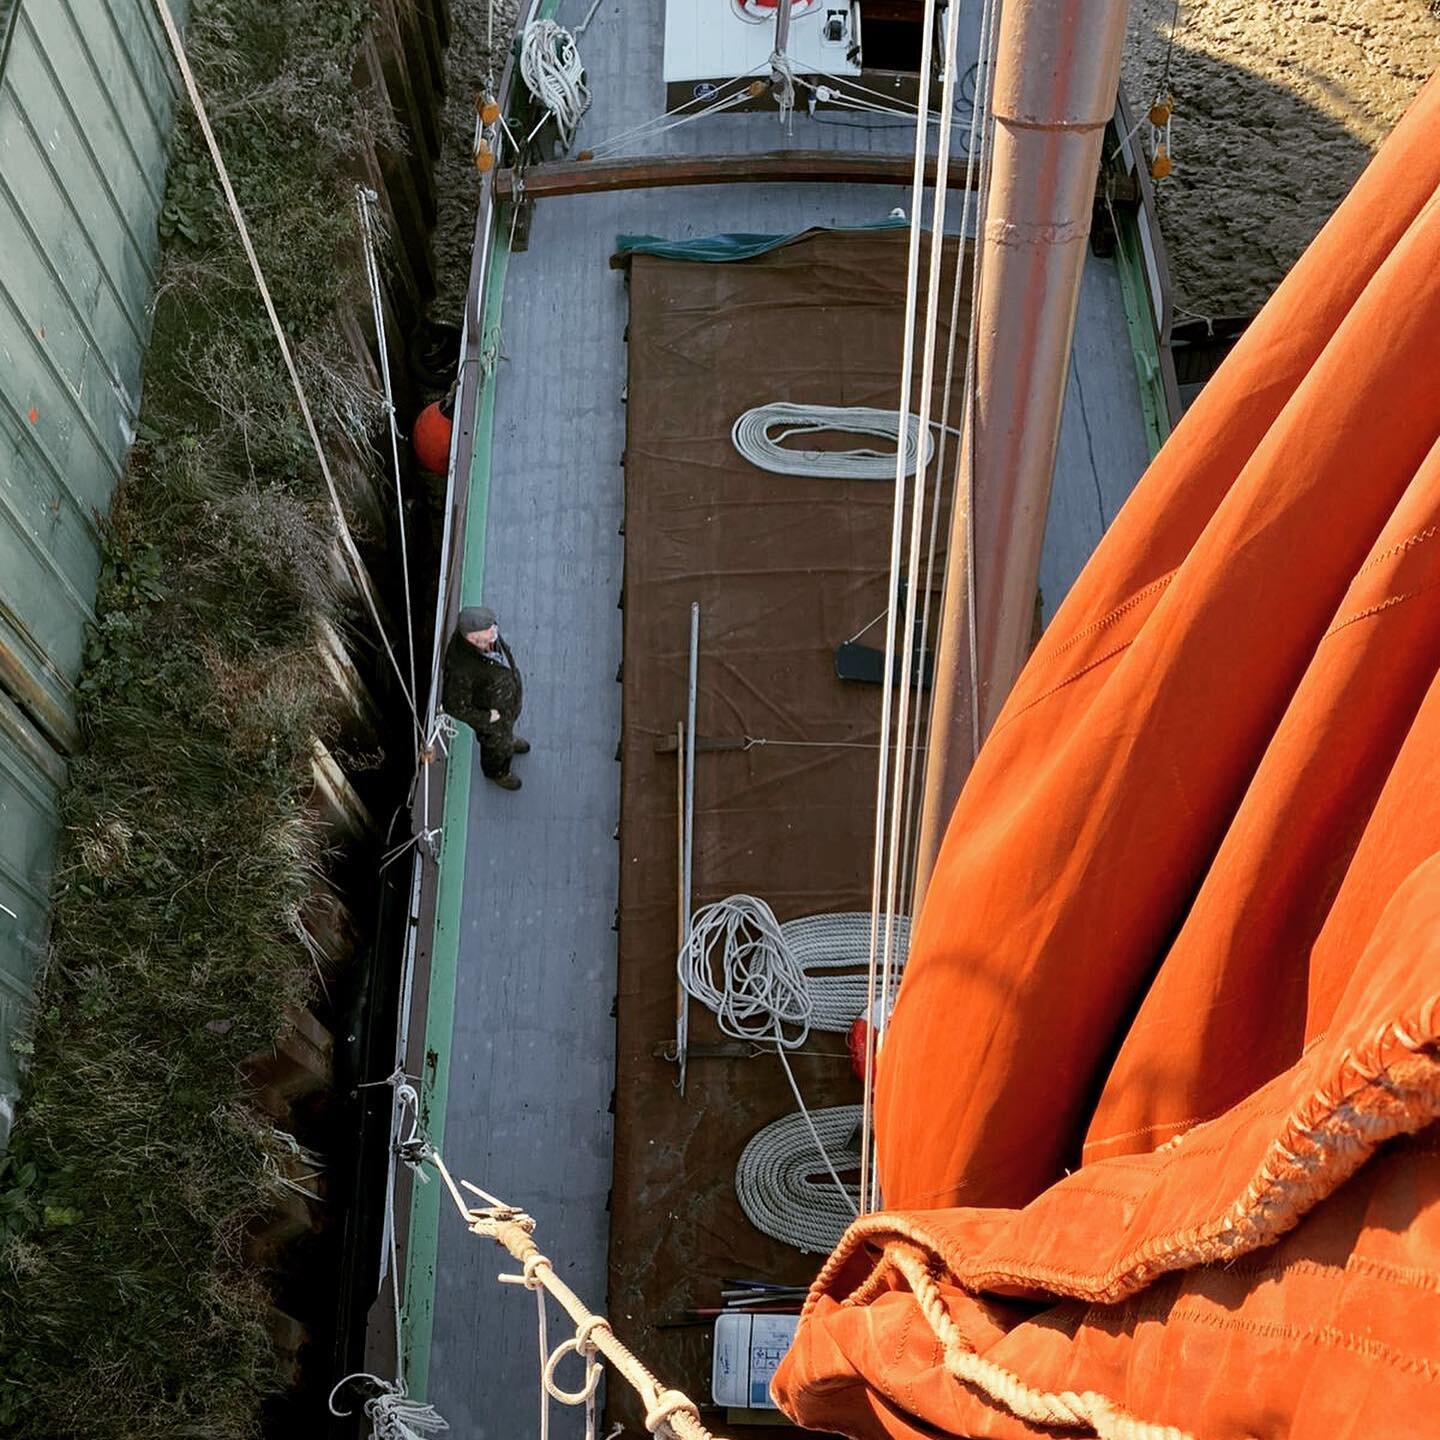 De rigging in the sunshine.
Lowering the gear today is a steady old job and is made easier when you have a good keen youngest who is quite happy to climb up and unstow the topsail.
Thanks @l.march for giving up your day to help with this important jo